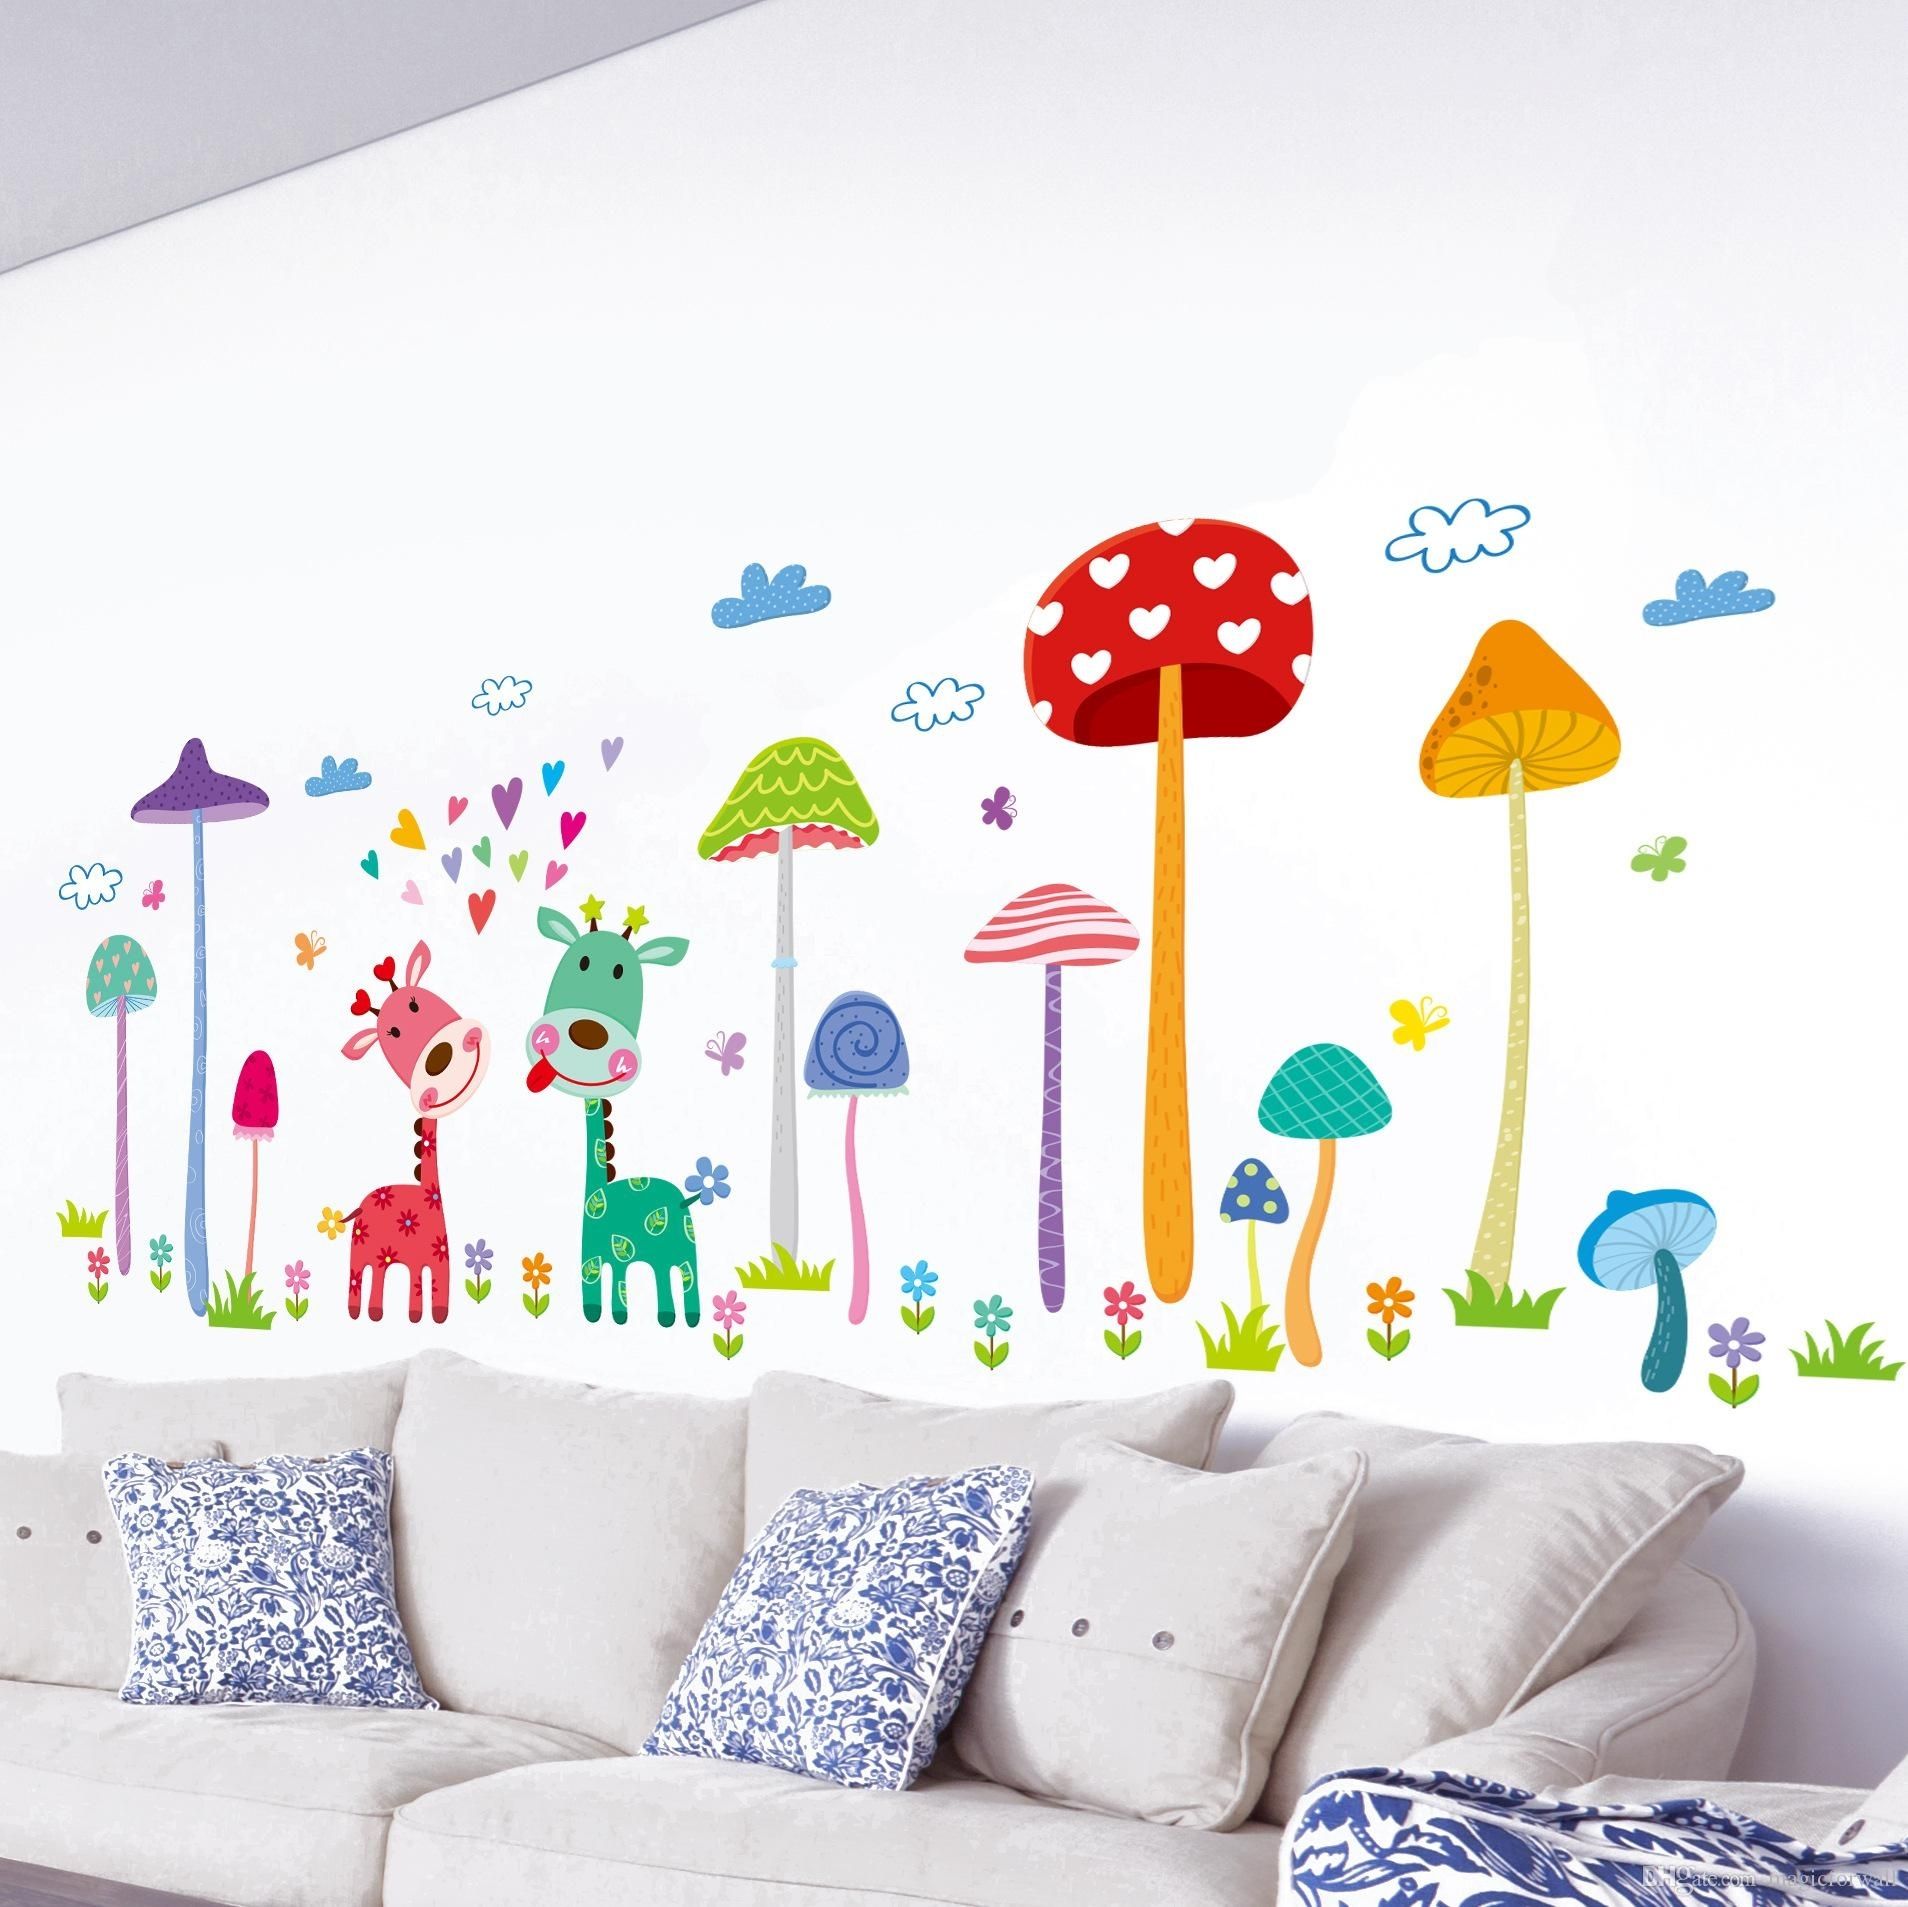 Forest Mushroom Deer Animals Home Wall Art Mural Decor Kids Babies Intended For Home Wall Art (View 15 of 20)